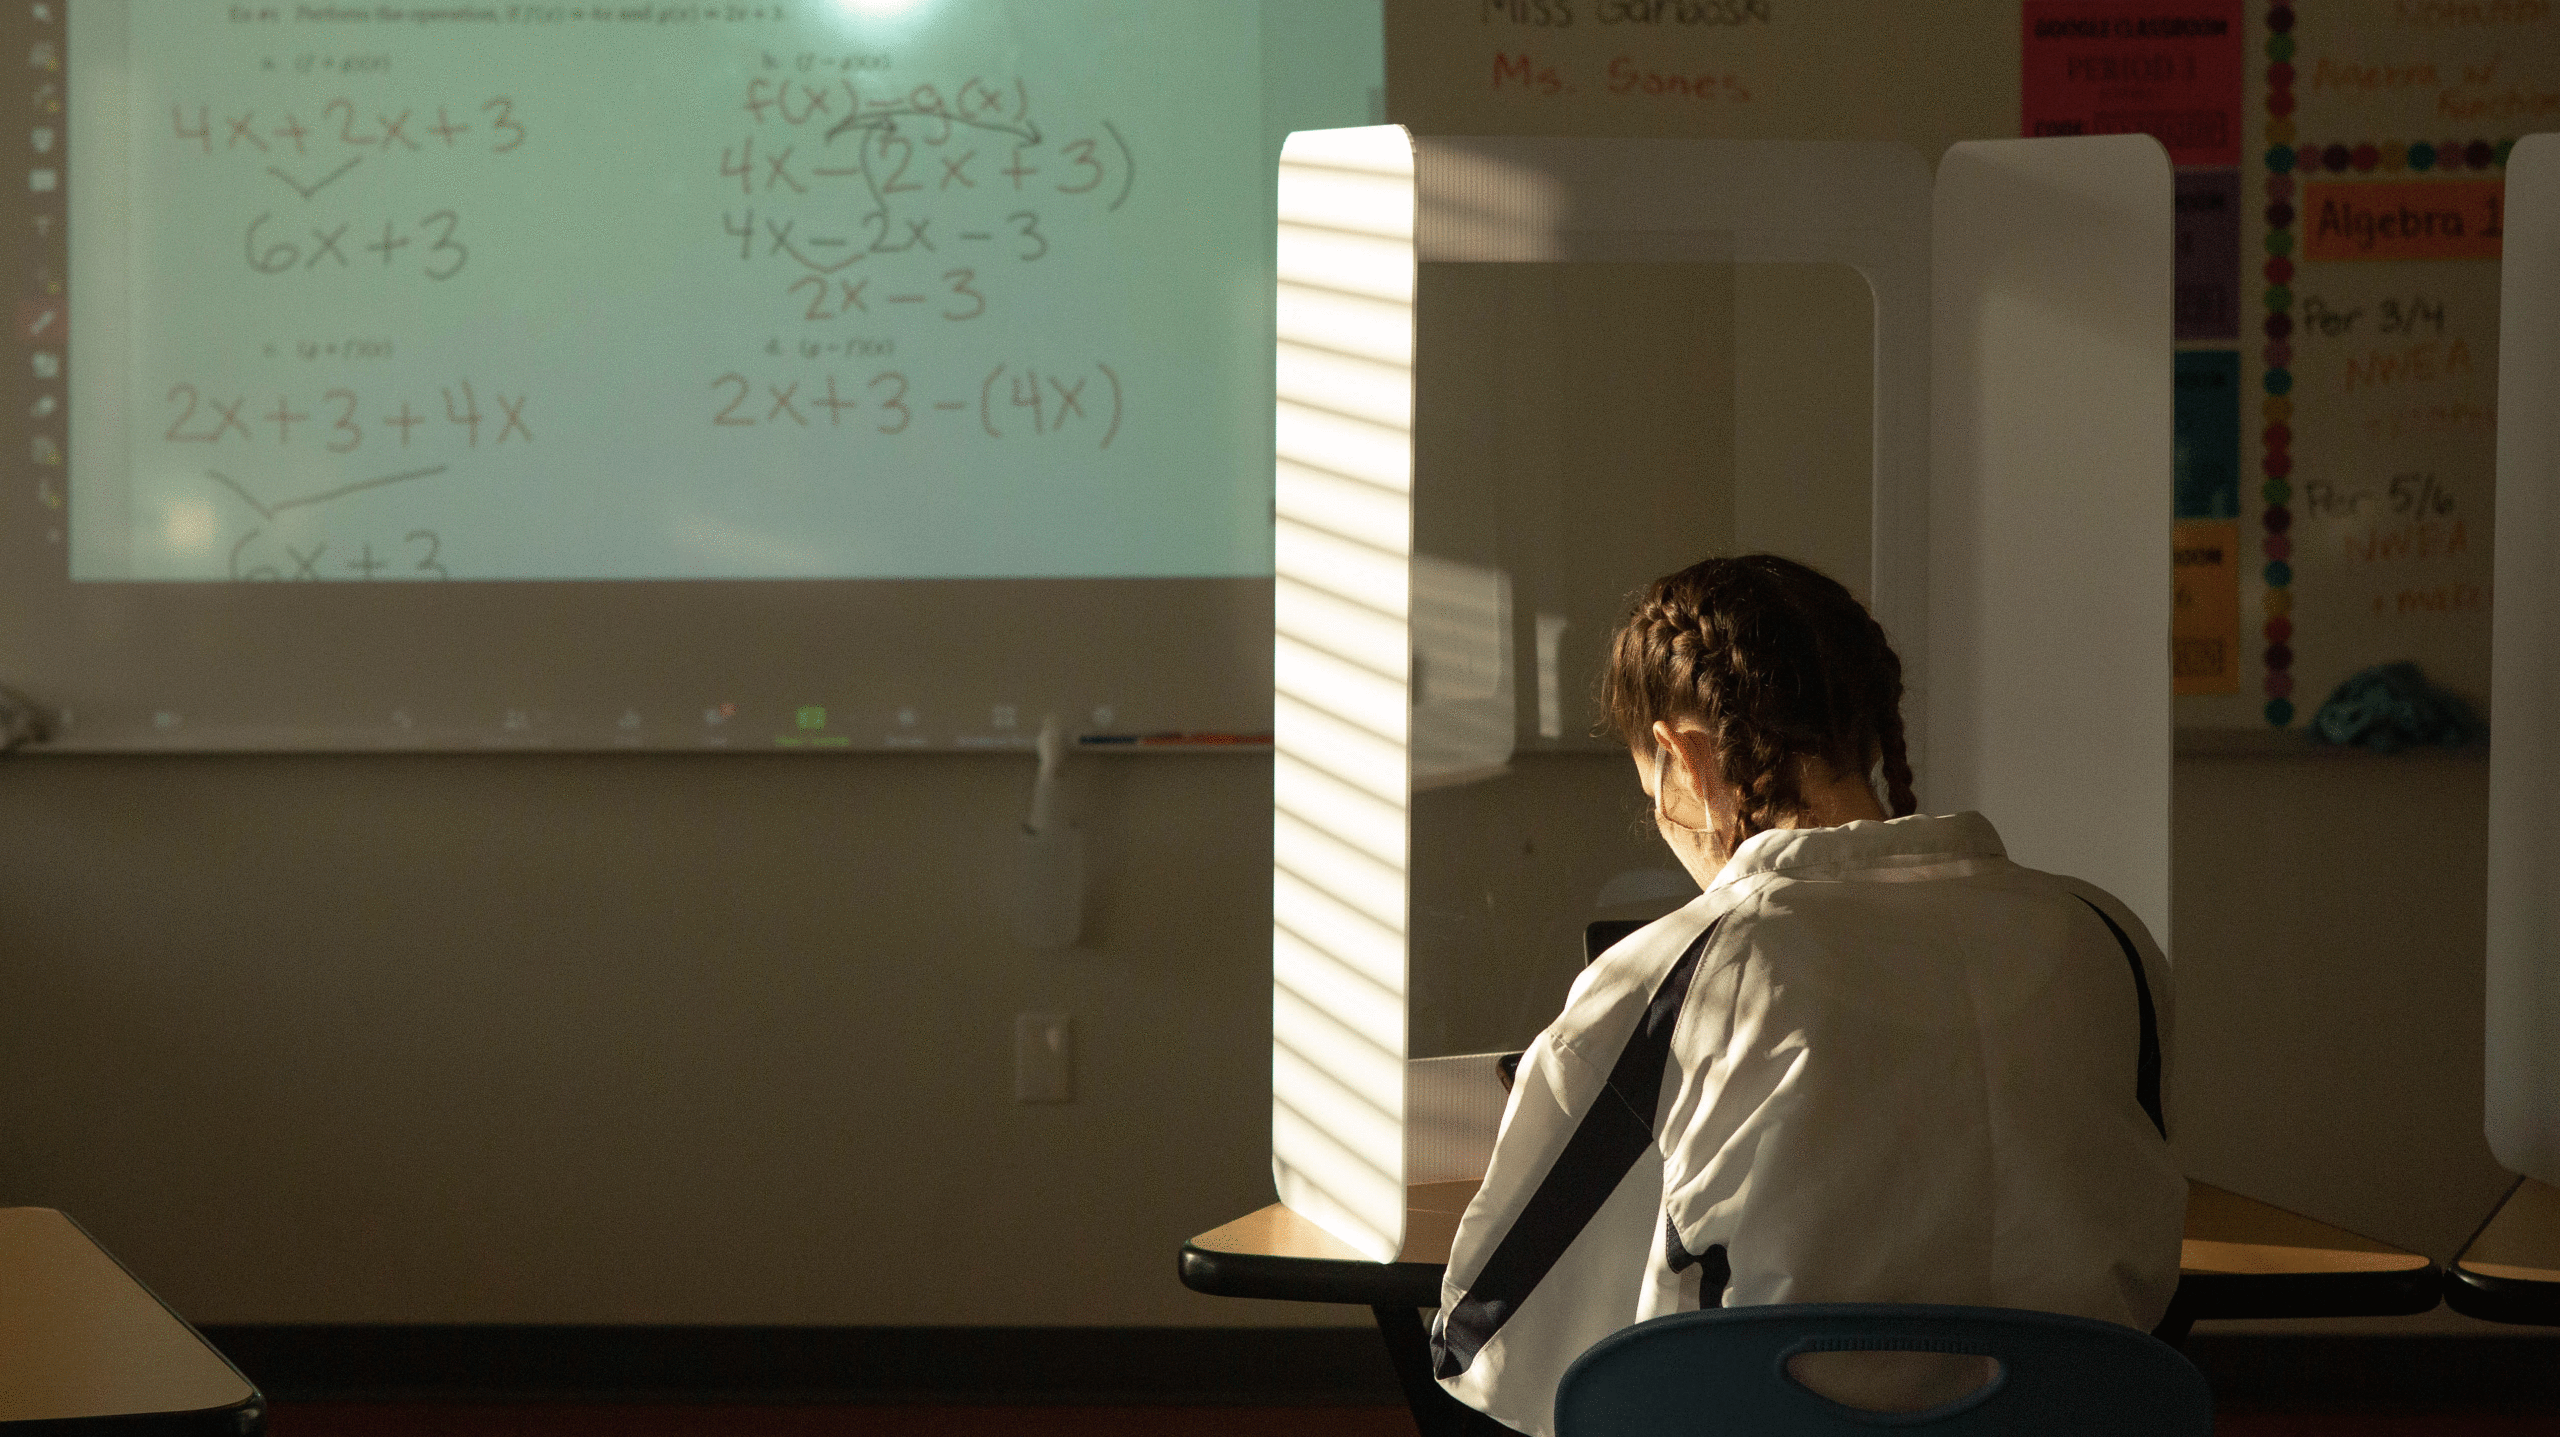 A young woman student in a darkened math class, looking through a protective screen at the calculations on a whiteboard